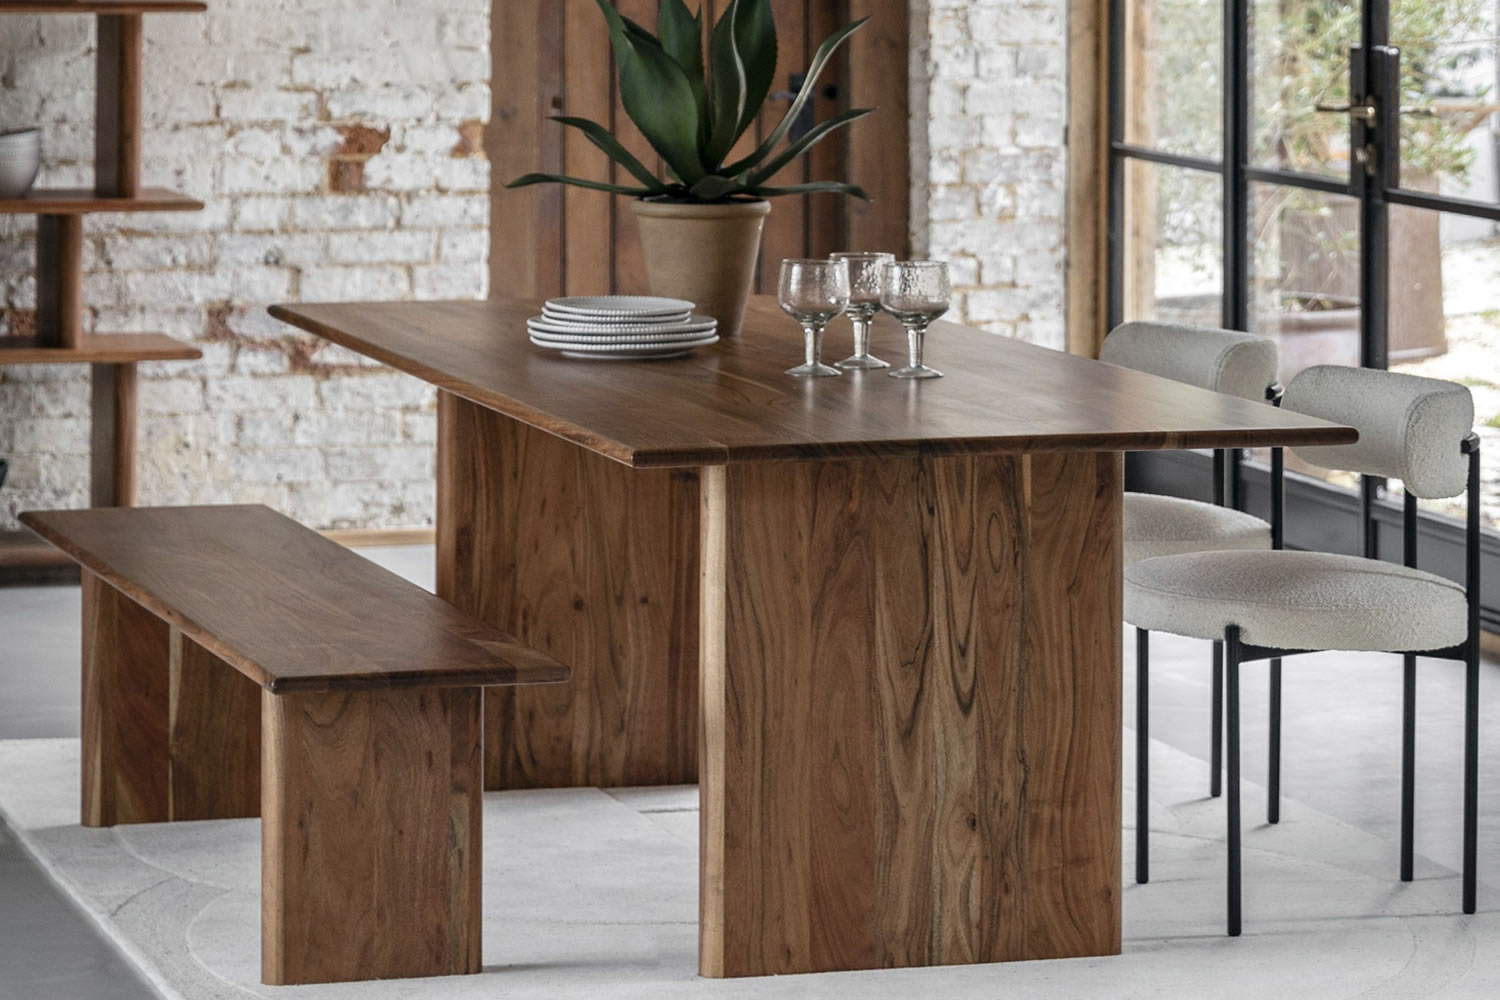 View Borden Small Wooden Kitchen Dining Table Crafted From Solid Acacia Wood Rich Grain Finish Robust Solid Legs Seats Up To 68 People information